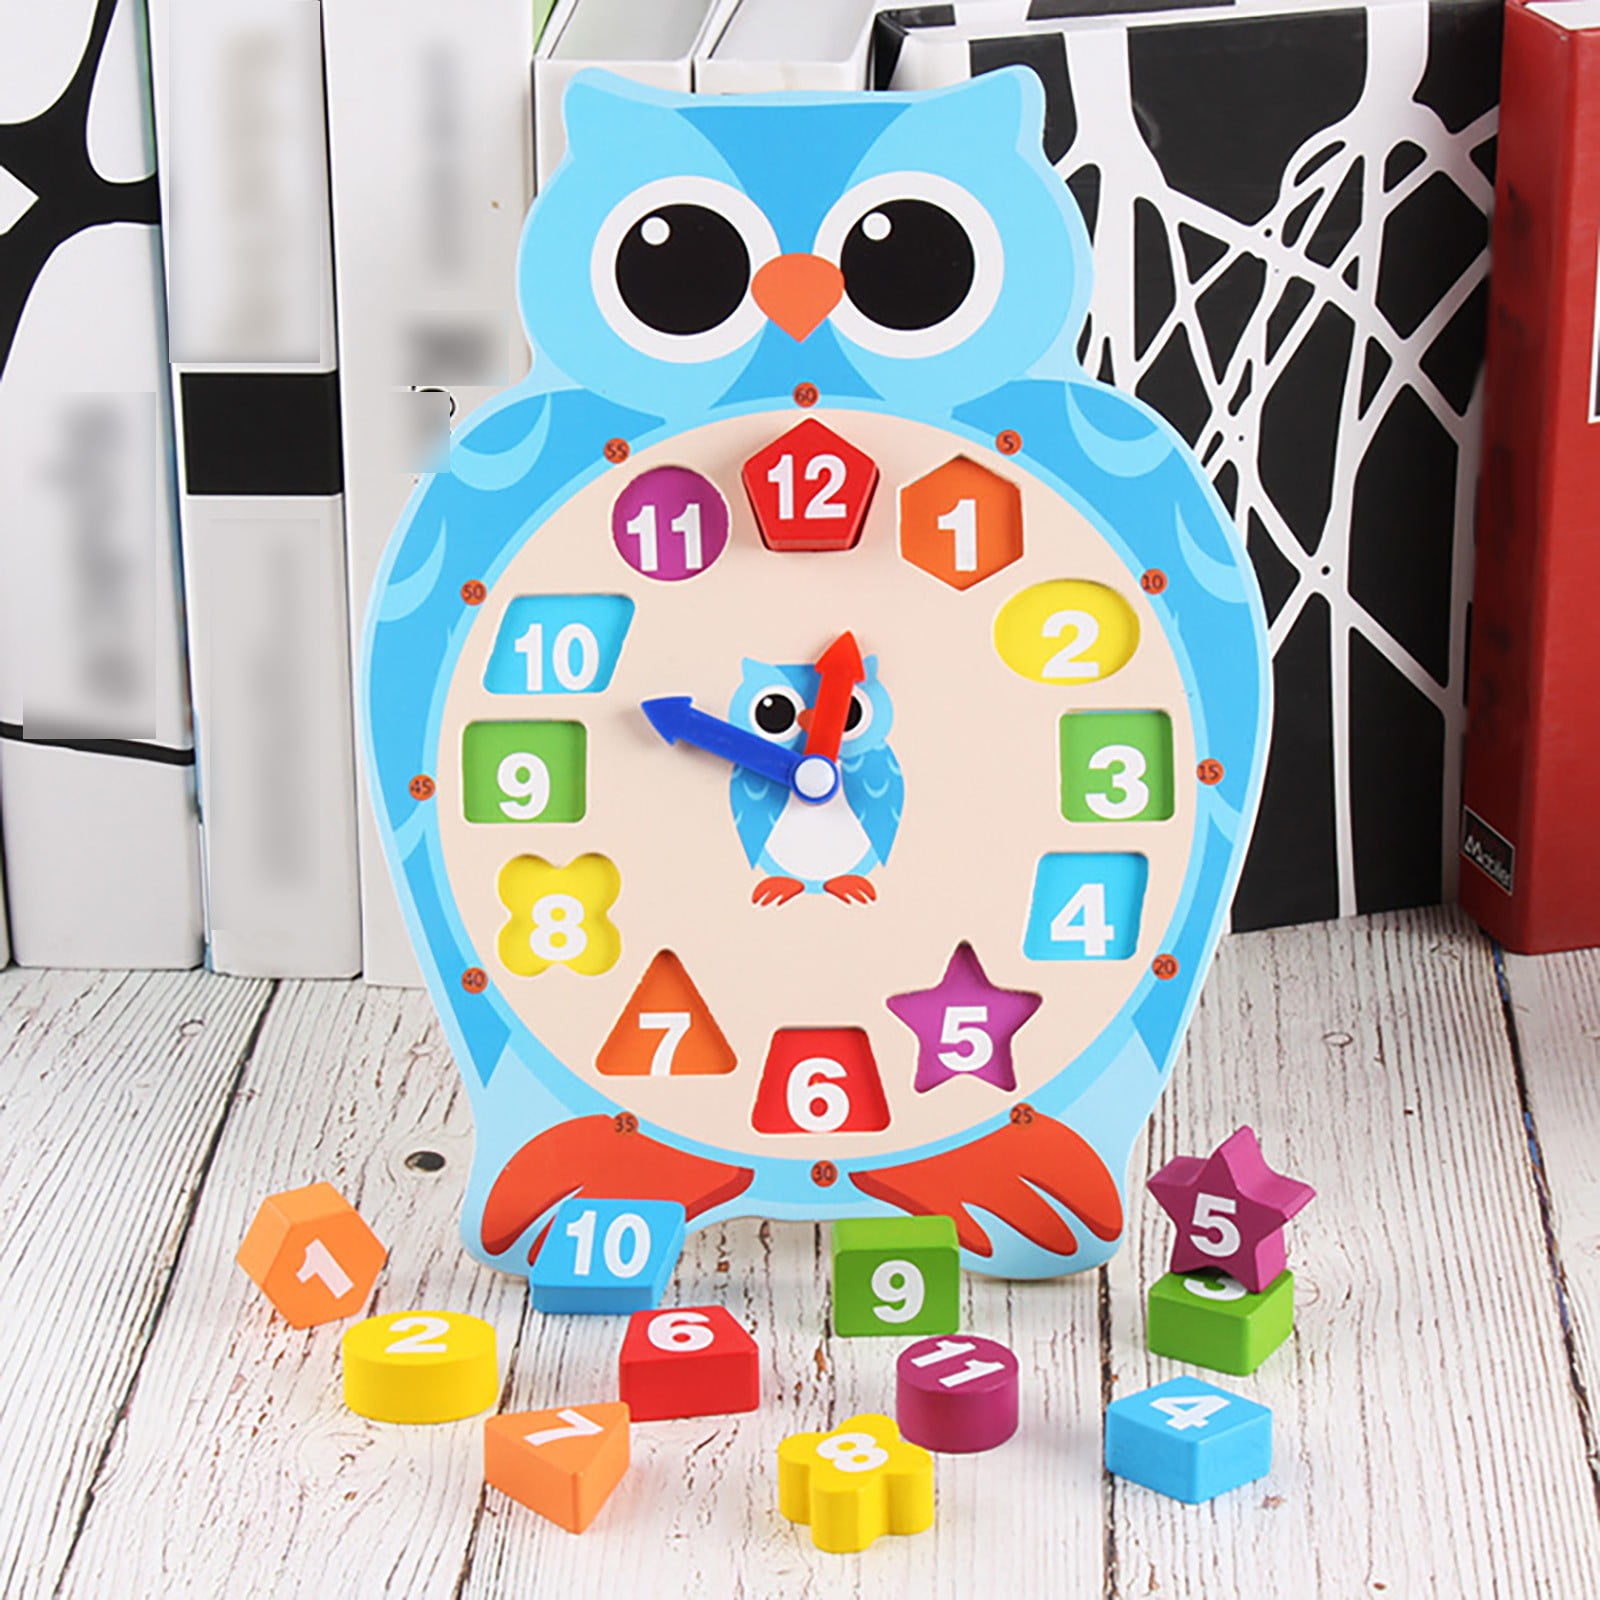 Clock Puzzle Wooden Sorting Blocks Clocks Colorful Child Number Teaching Toys RU 